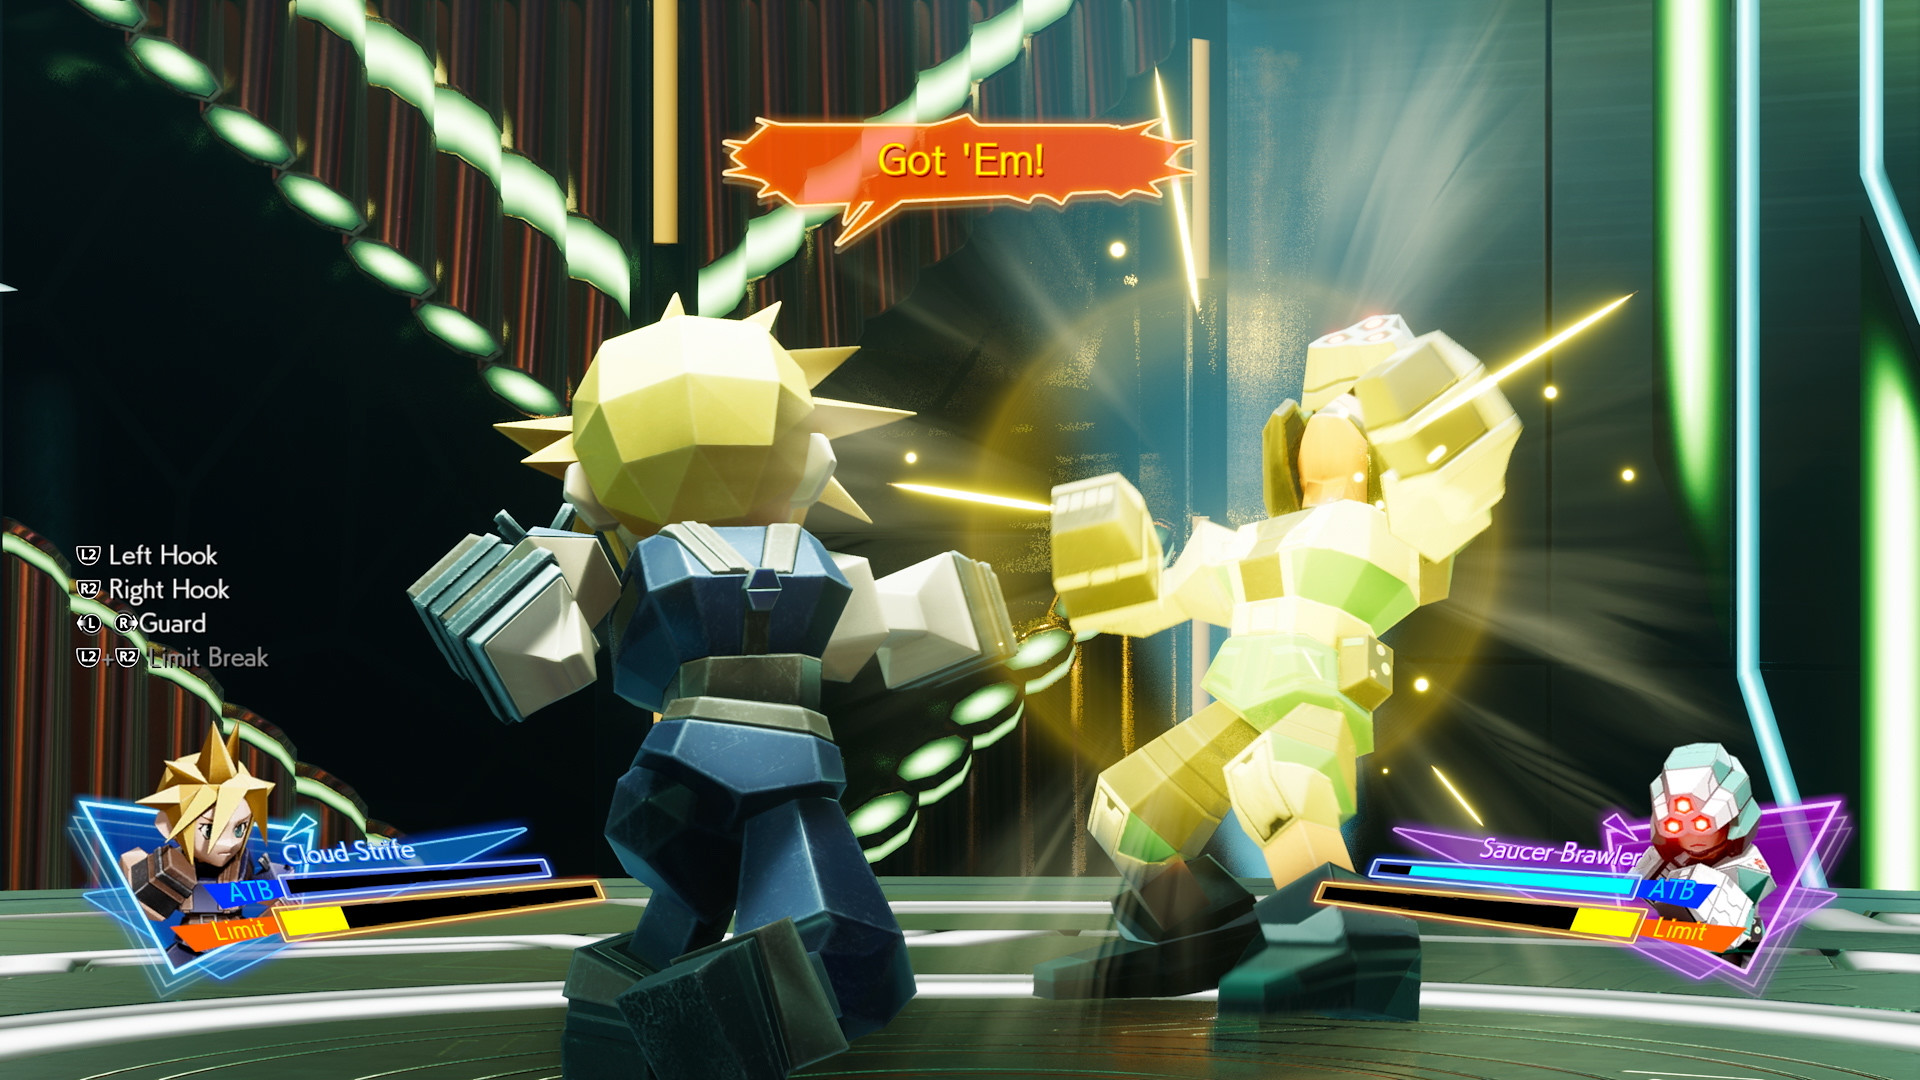 One of Gold Saucer’s mini-games sees two fighters duking it out. The player is able to use their Cloud Strife avatar fighter to swing a left or right hook (L2 or R2 respectively), guard by hitting left or right on the analog stick, or hold L2 and R2 to unleash a Limit Break. Each fighter has a ATB bar and a Limit bar, shown at the bottom left and bottom right of the screen.